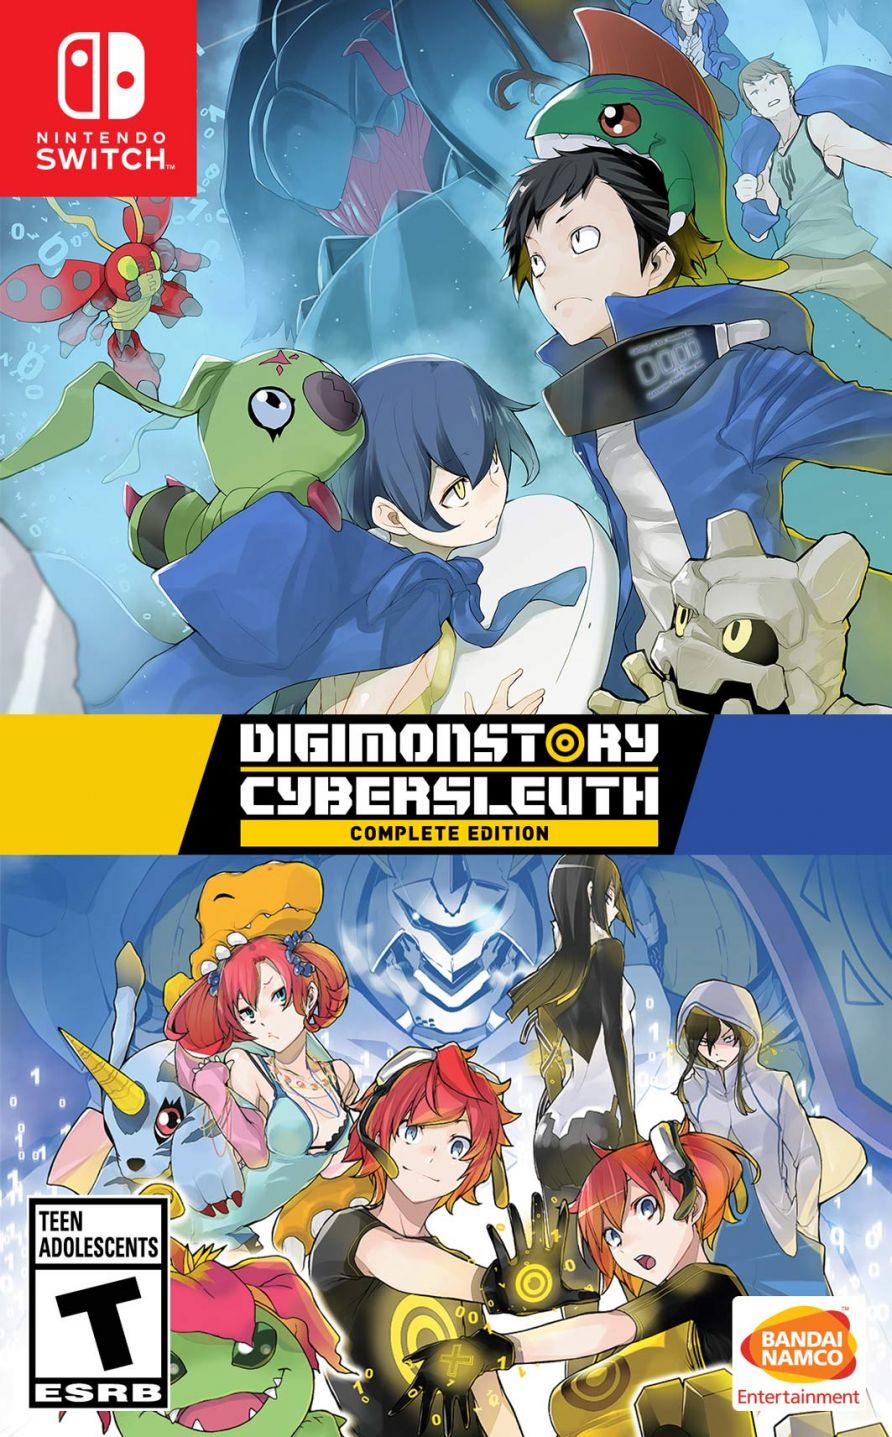 digimon-story-cyber-sleuth-complete-edition-boxart-pre-orders-open